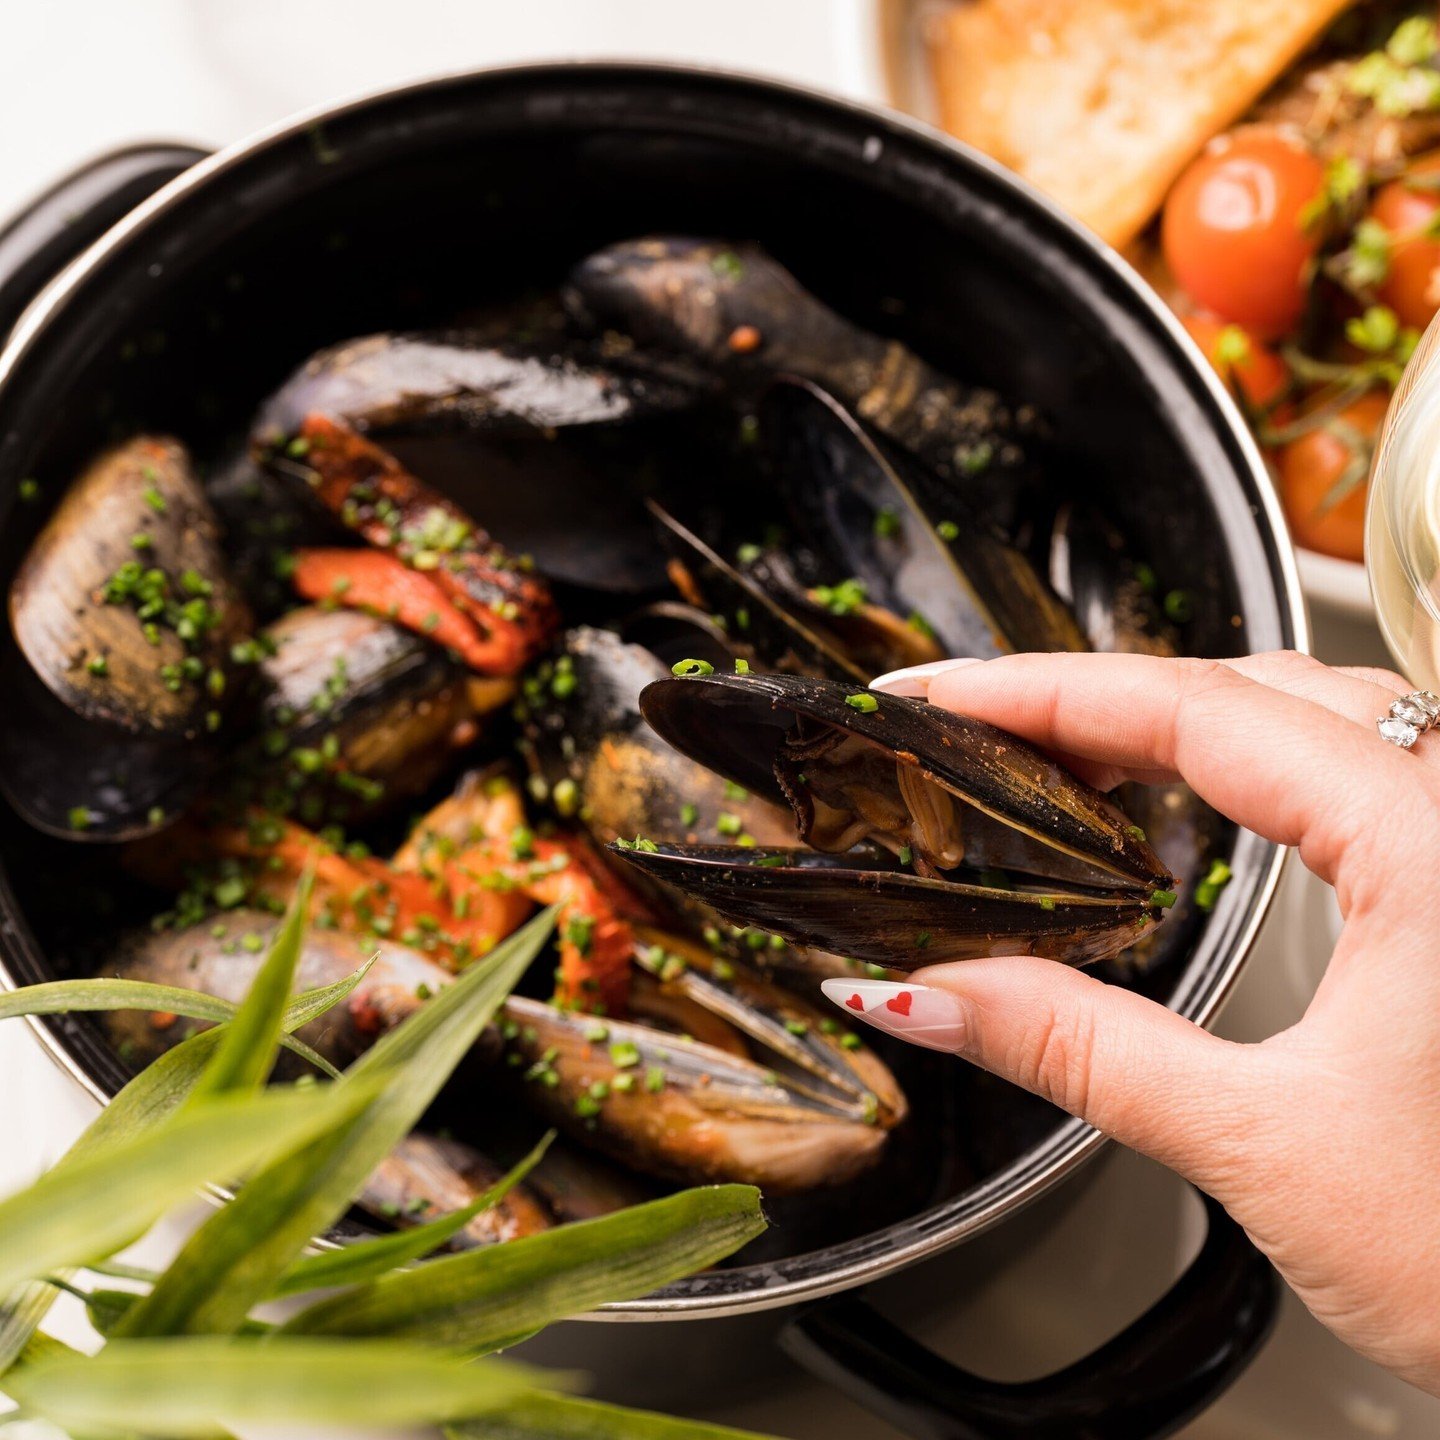 Show us your...mussels 😜 Enjoy our $20 mussel pot special, $12 selected cocktails and live music in the courtyard every Thursday night.

Bookings via our website.